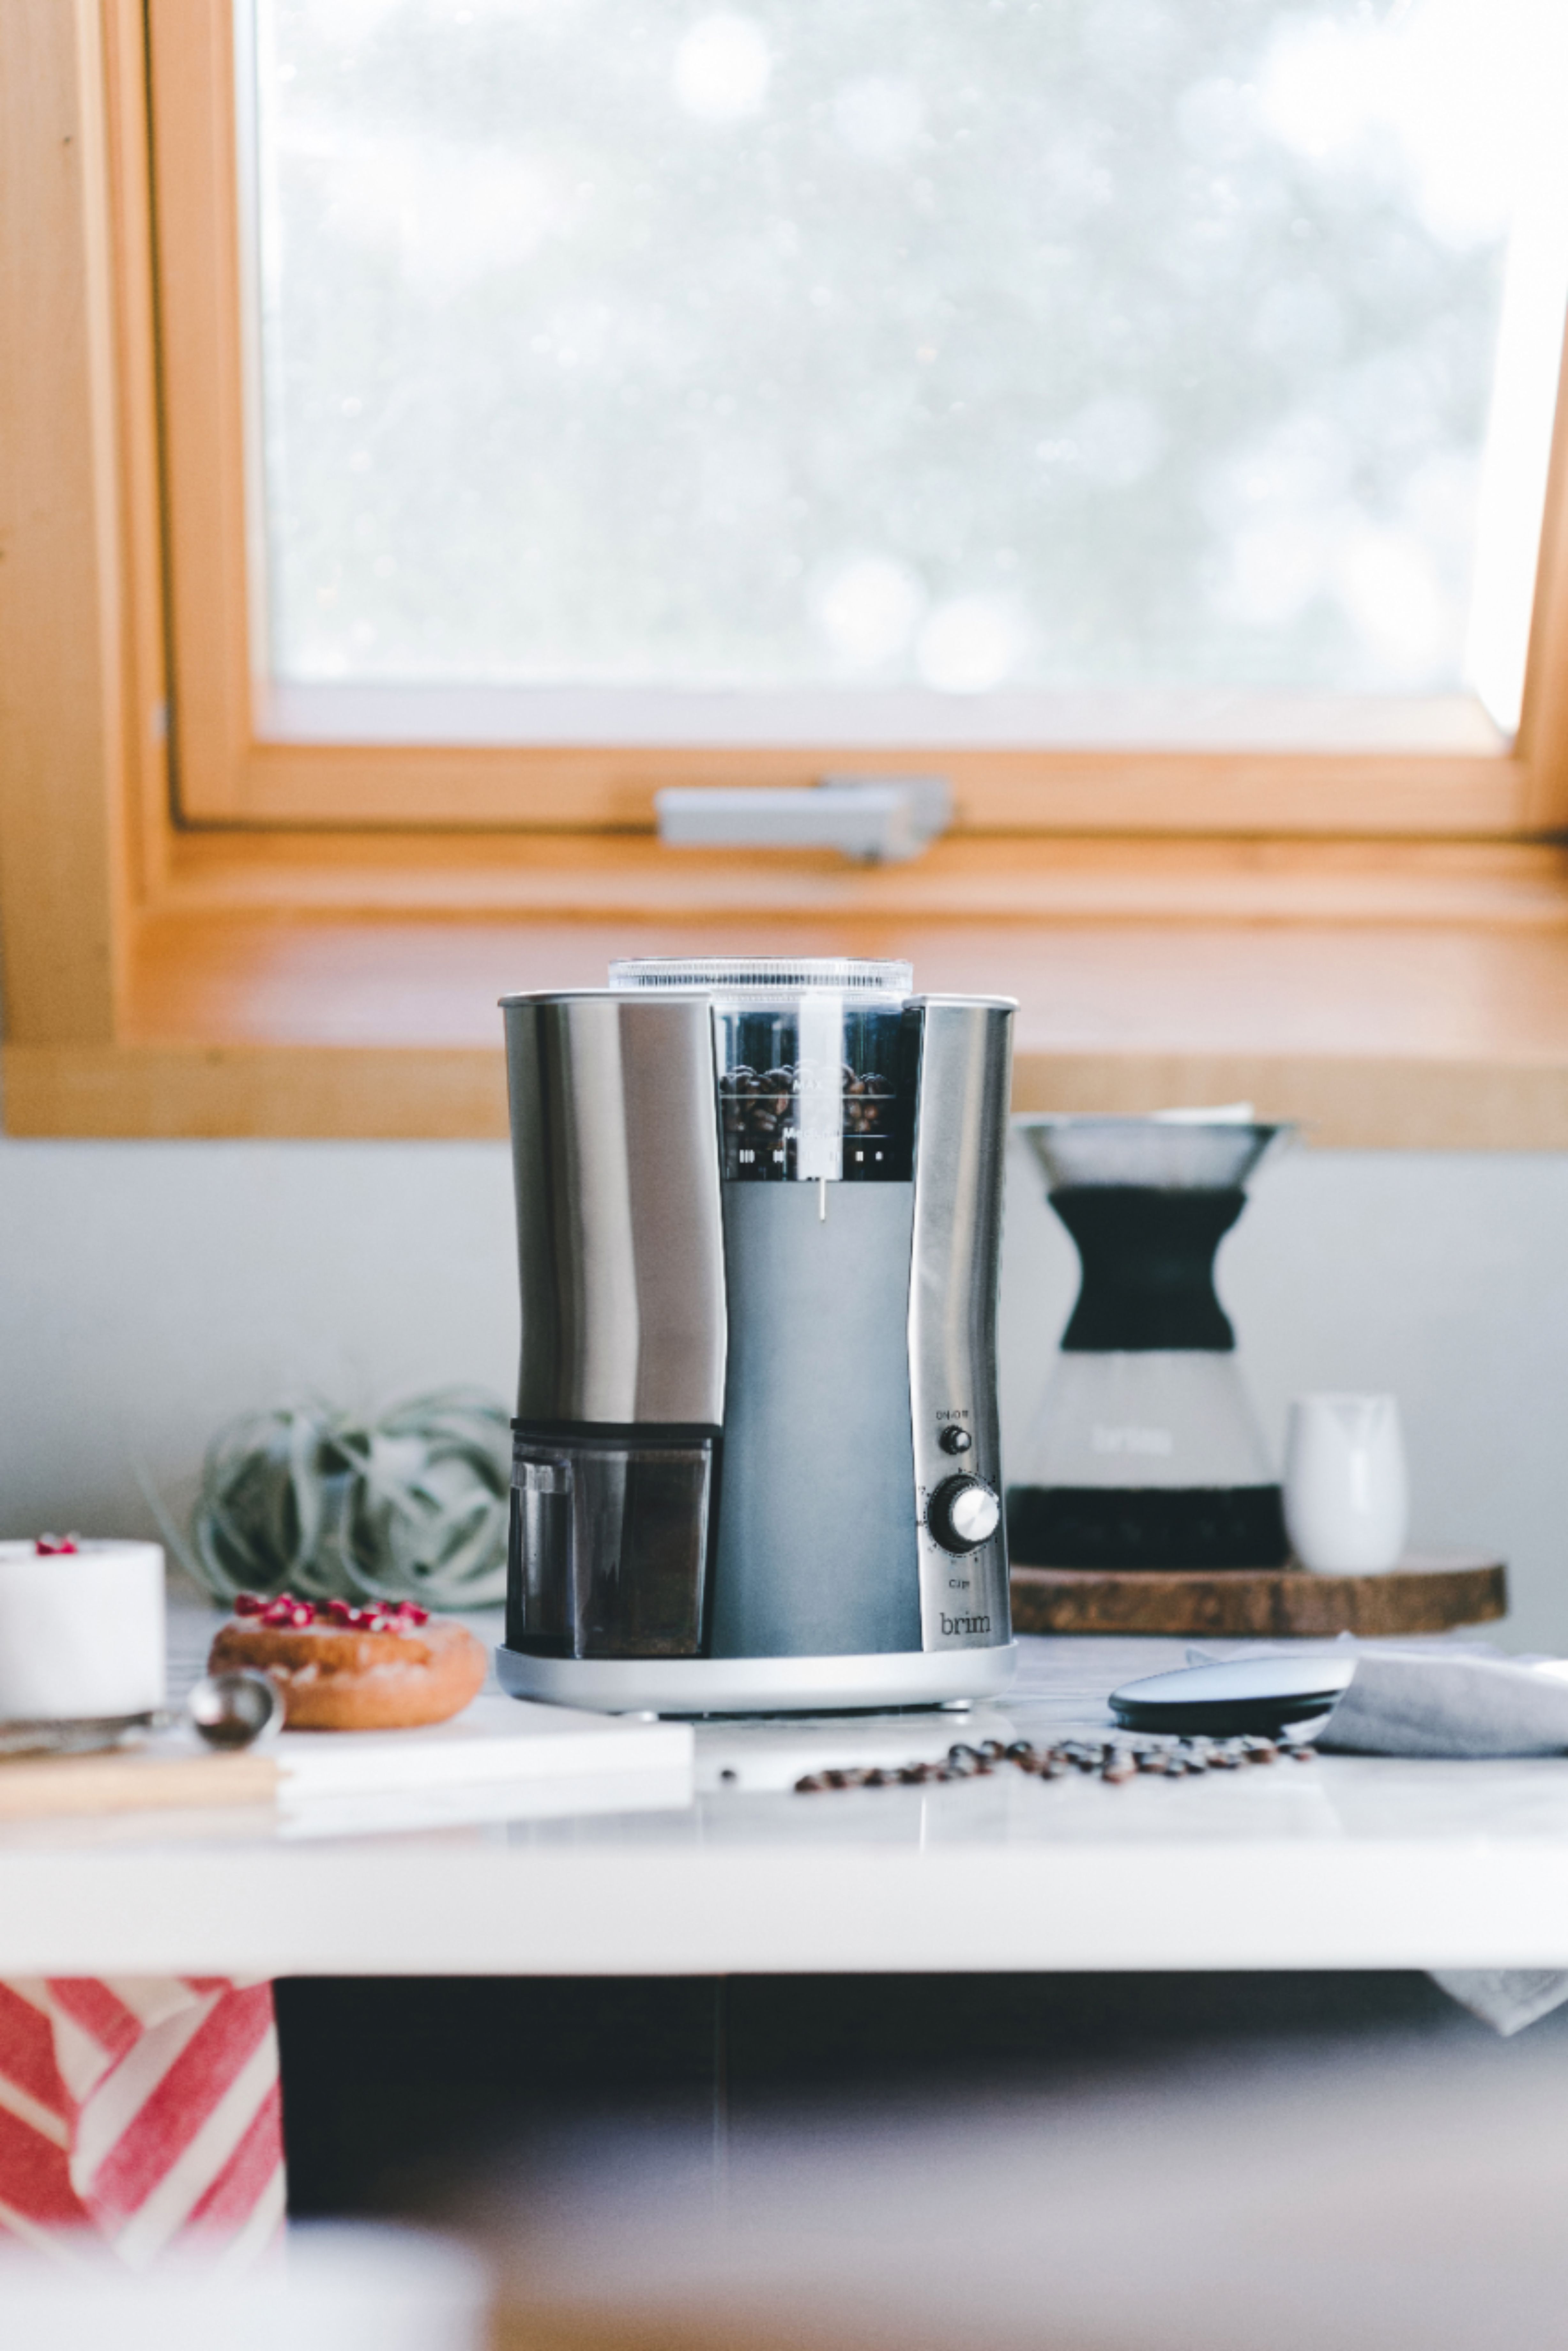  Cuisinart Programmable Conical Burr Mill, Stainless Steel,  COMPACT: Power Burr Coffee Grinders: Home & Kitchen